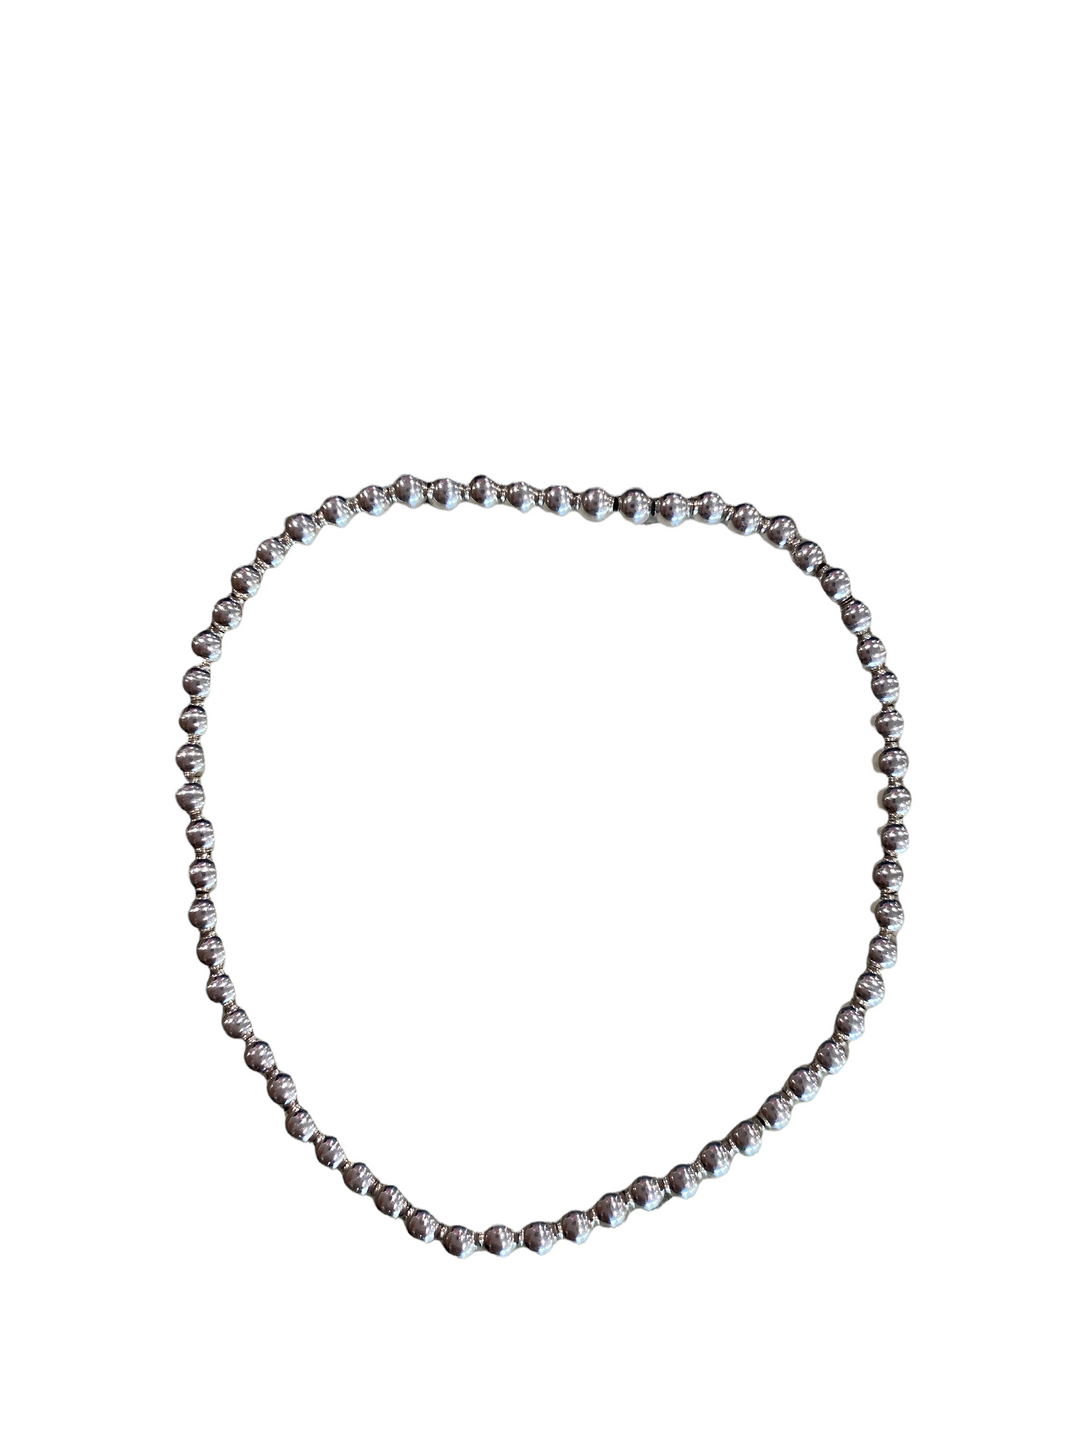 SILVER 3mm CLASSIC BEAD BRACELET - Kingfisher Road - Online Boutique